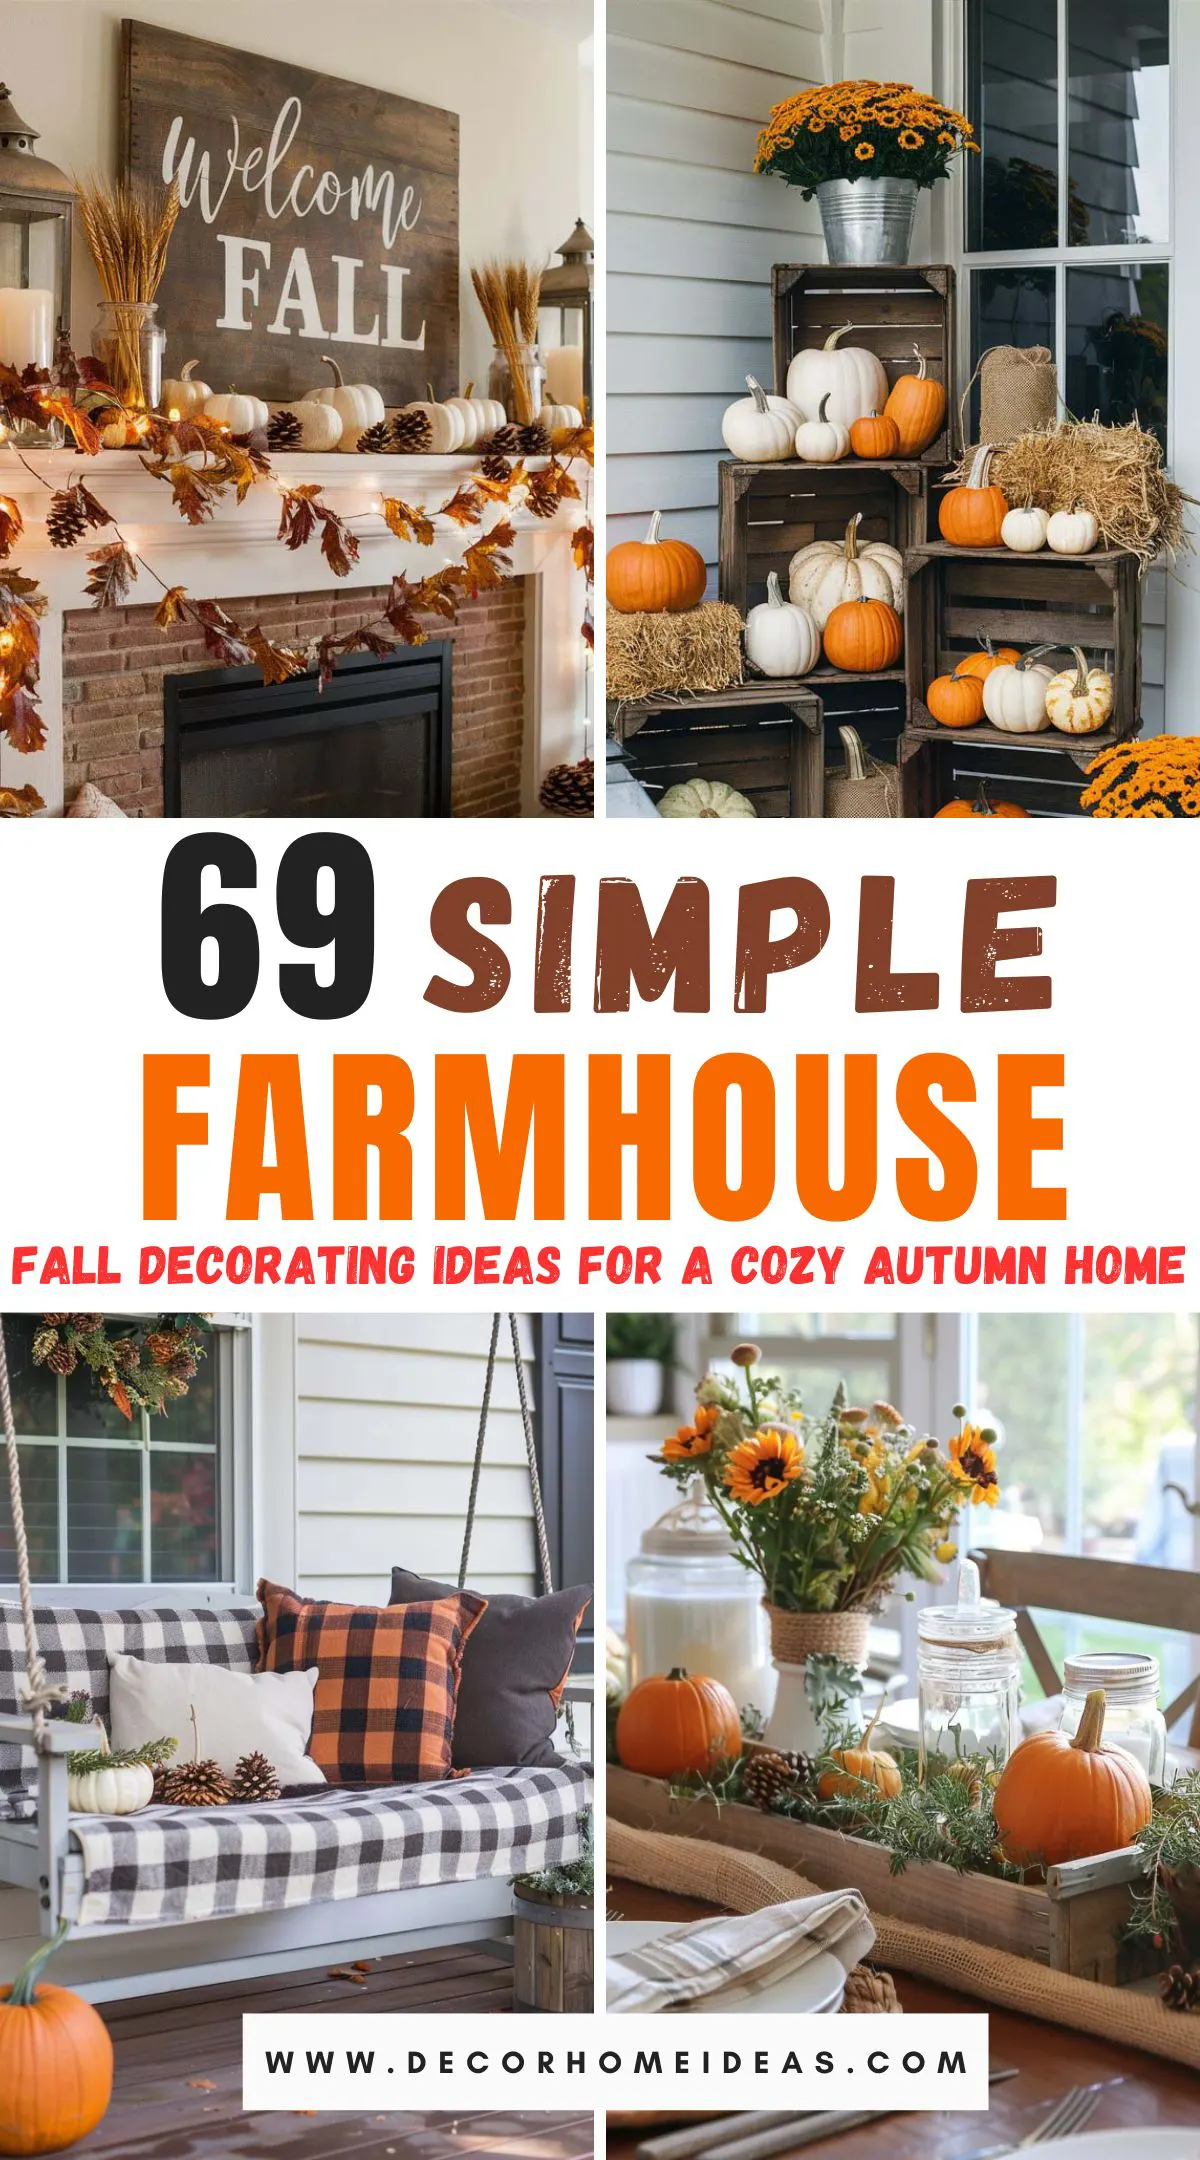 Cozy up your home this autumn with 69 charming farmhouse fall decorating ideas. Discover delightful ways to incorporate rustic elements, warm colors, and vintage accents to create a welcoming and heartwarming atmosphere. Check out the post for creative tips to transform your home into a fall haven.